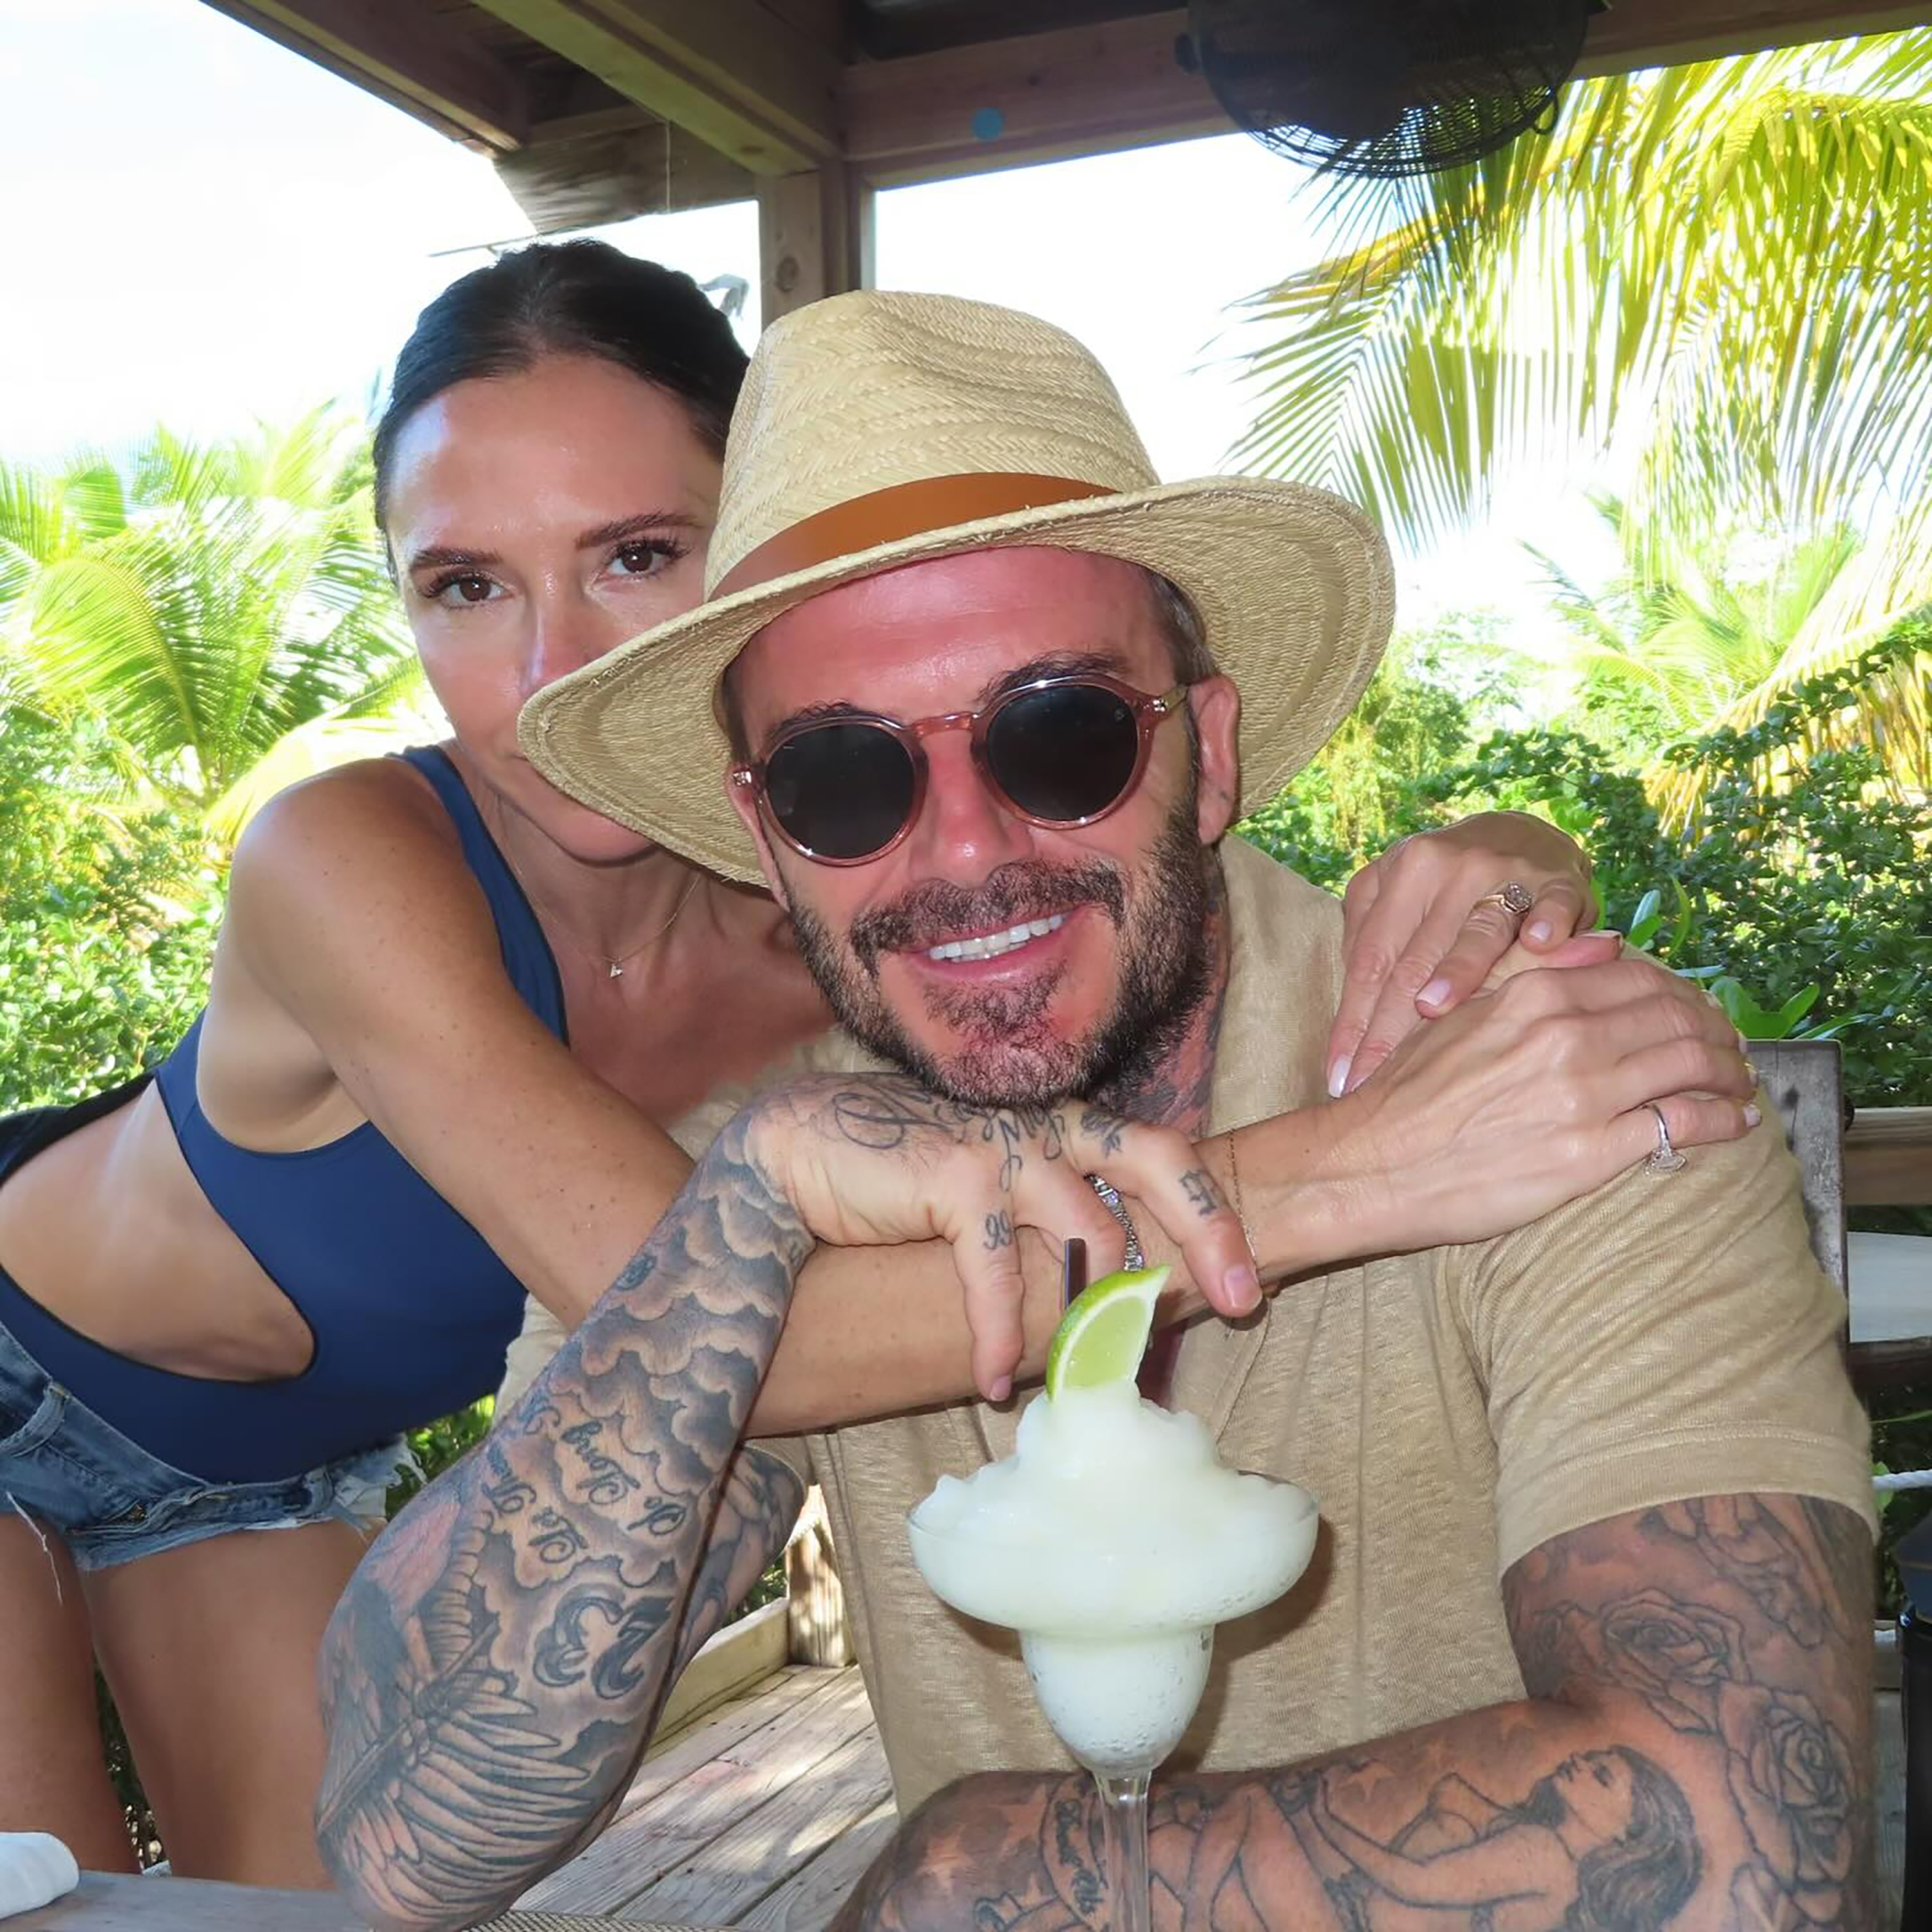 The showbiz power couple relaxed after their busy year with a trip to the Bahamas